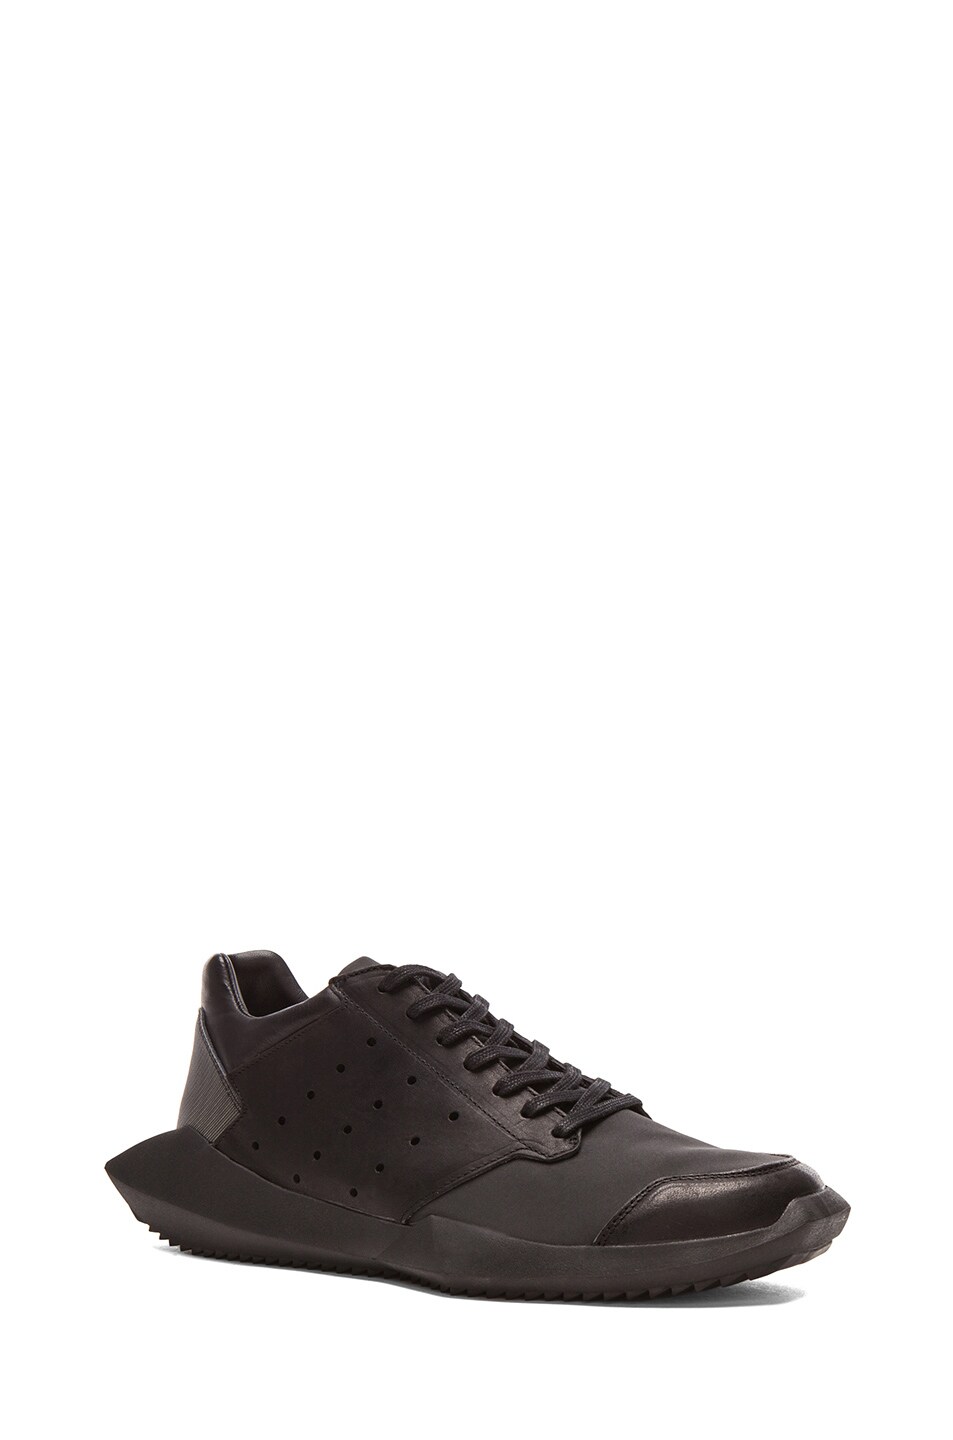 Image 1 of Rick Owens x Adidas Leatehr Trainers in Black